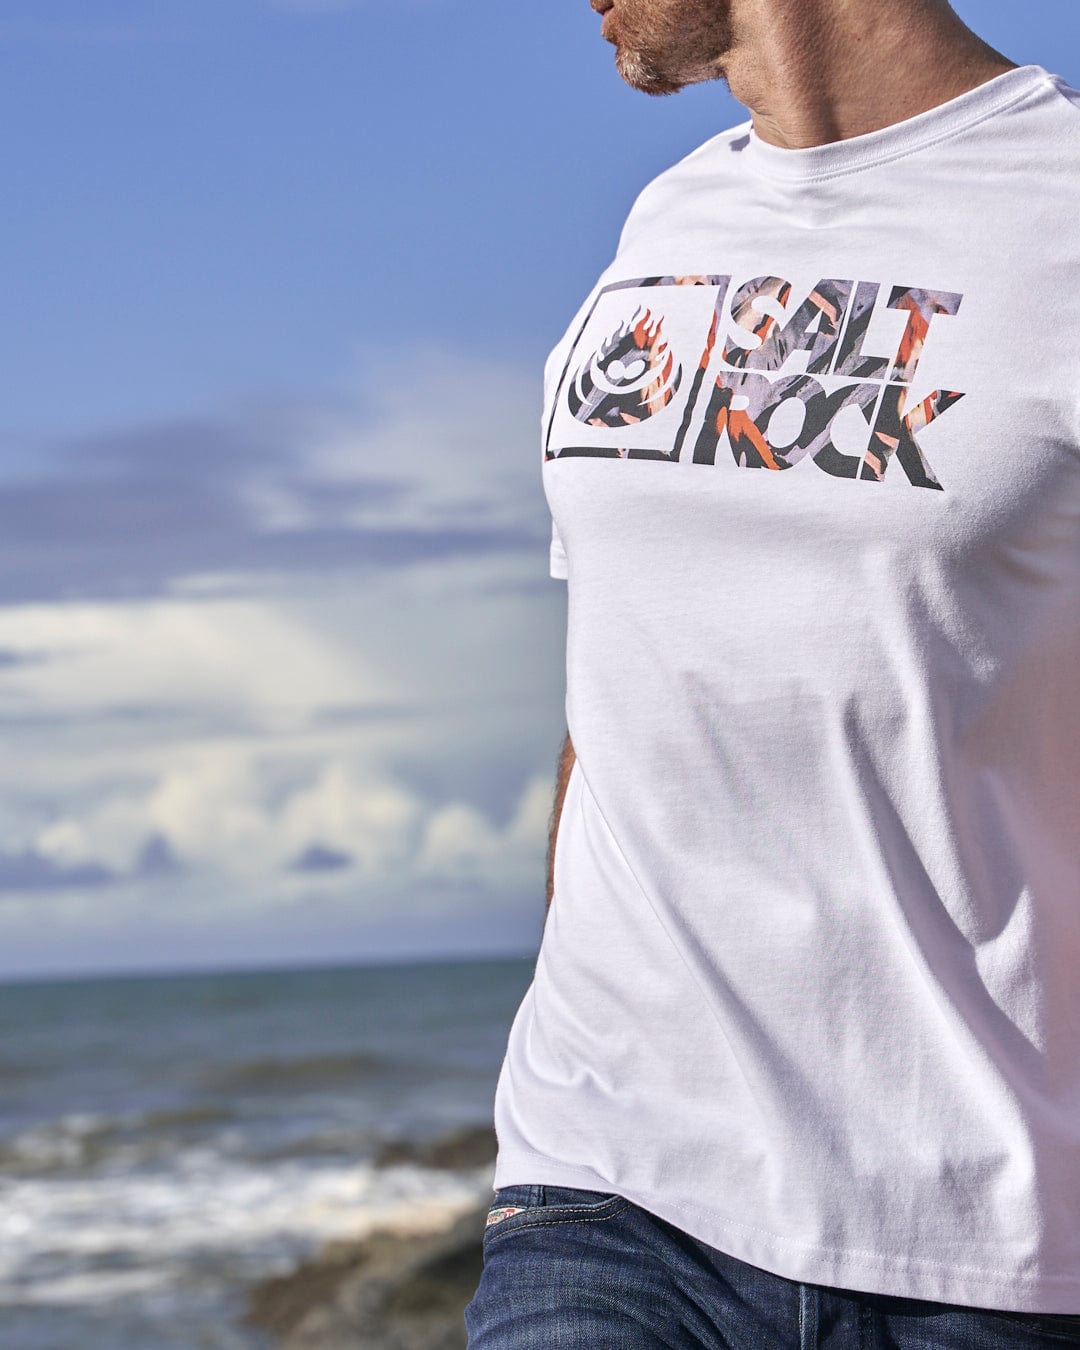 A man is standing on the beach wearing a white Mountain Logo - Mens Short Sleeve T-Shirt featuring the Saltrock branding.